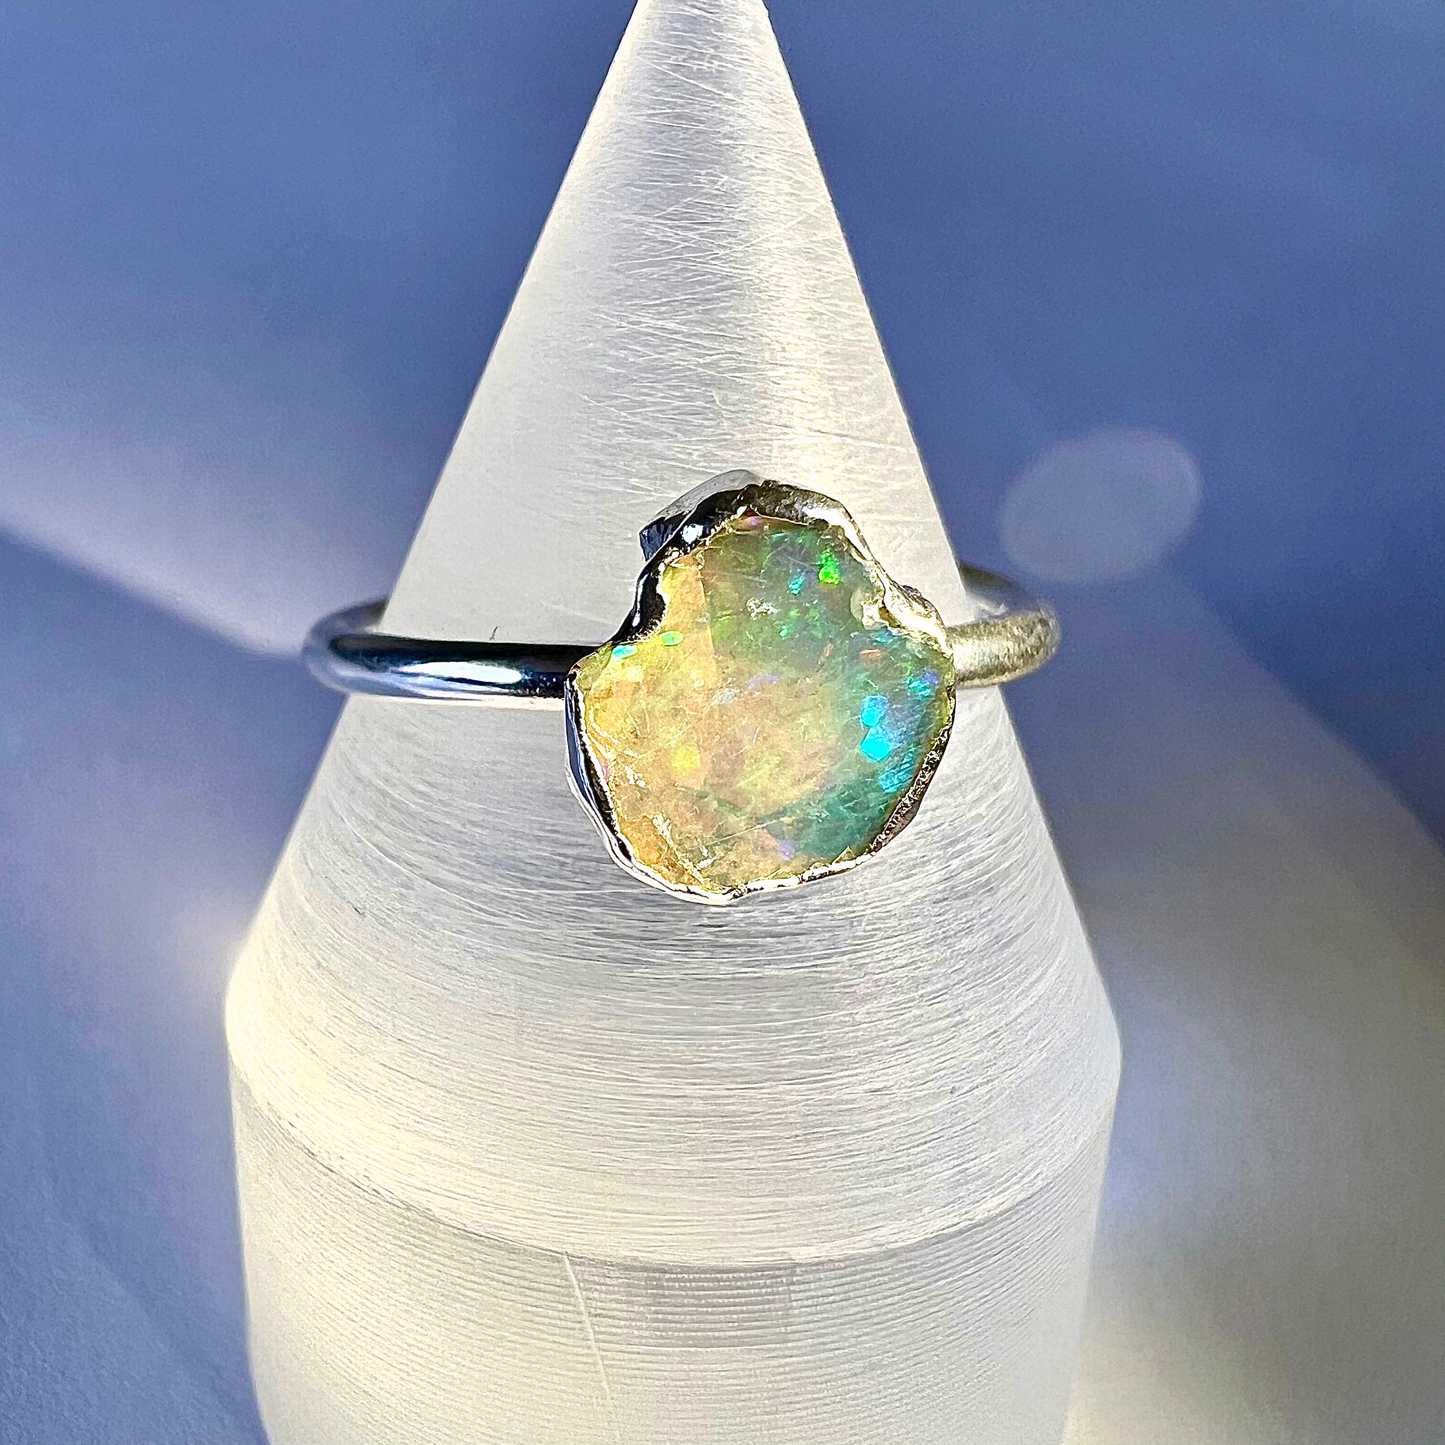 Raw Opal Handmade Adjustable Ring in Sterling Silver